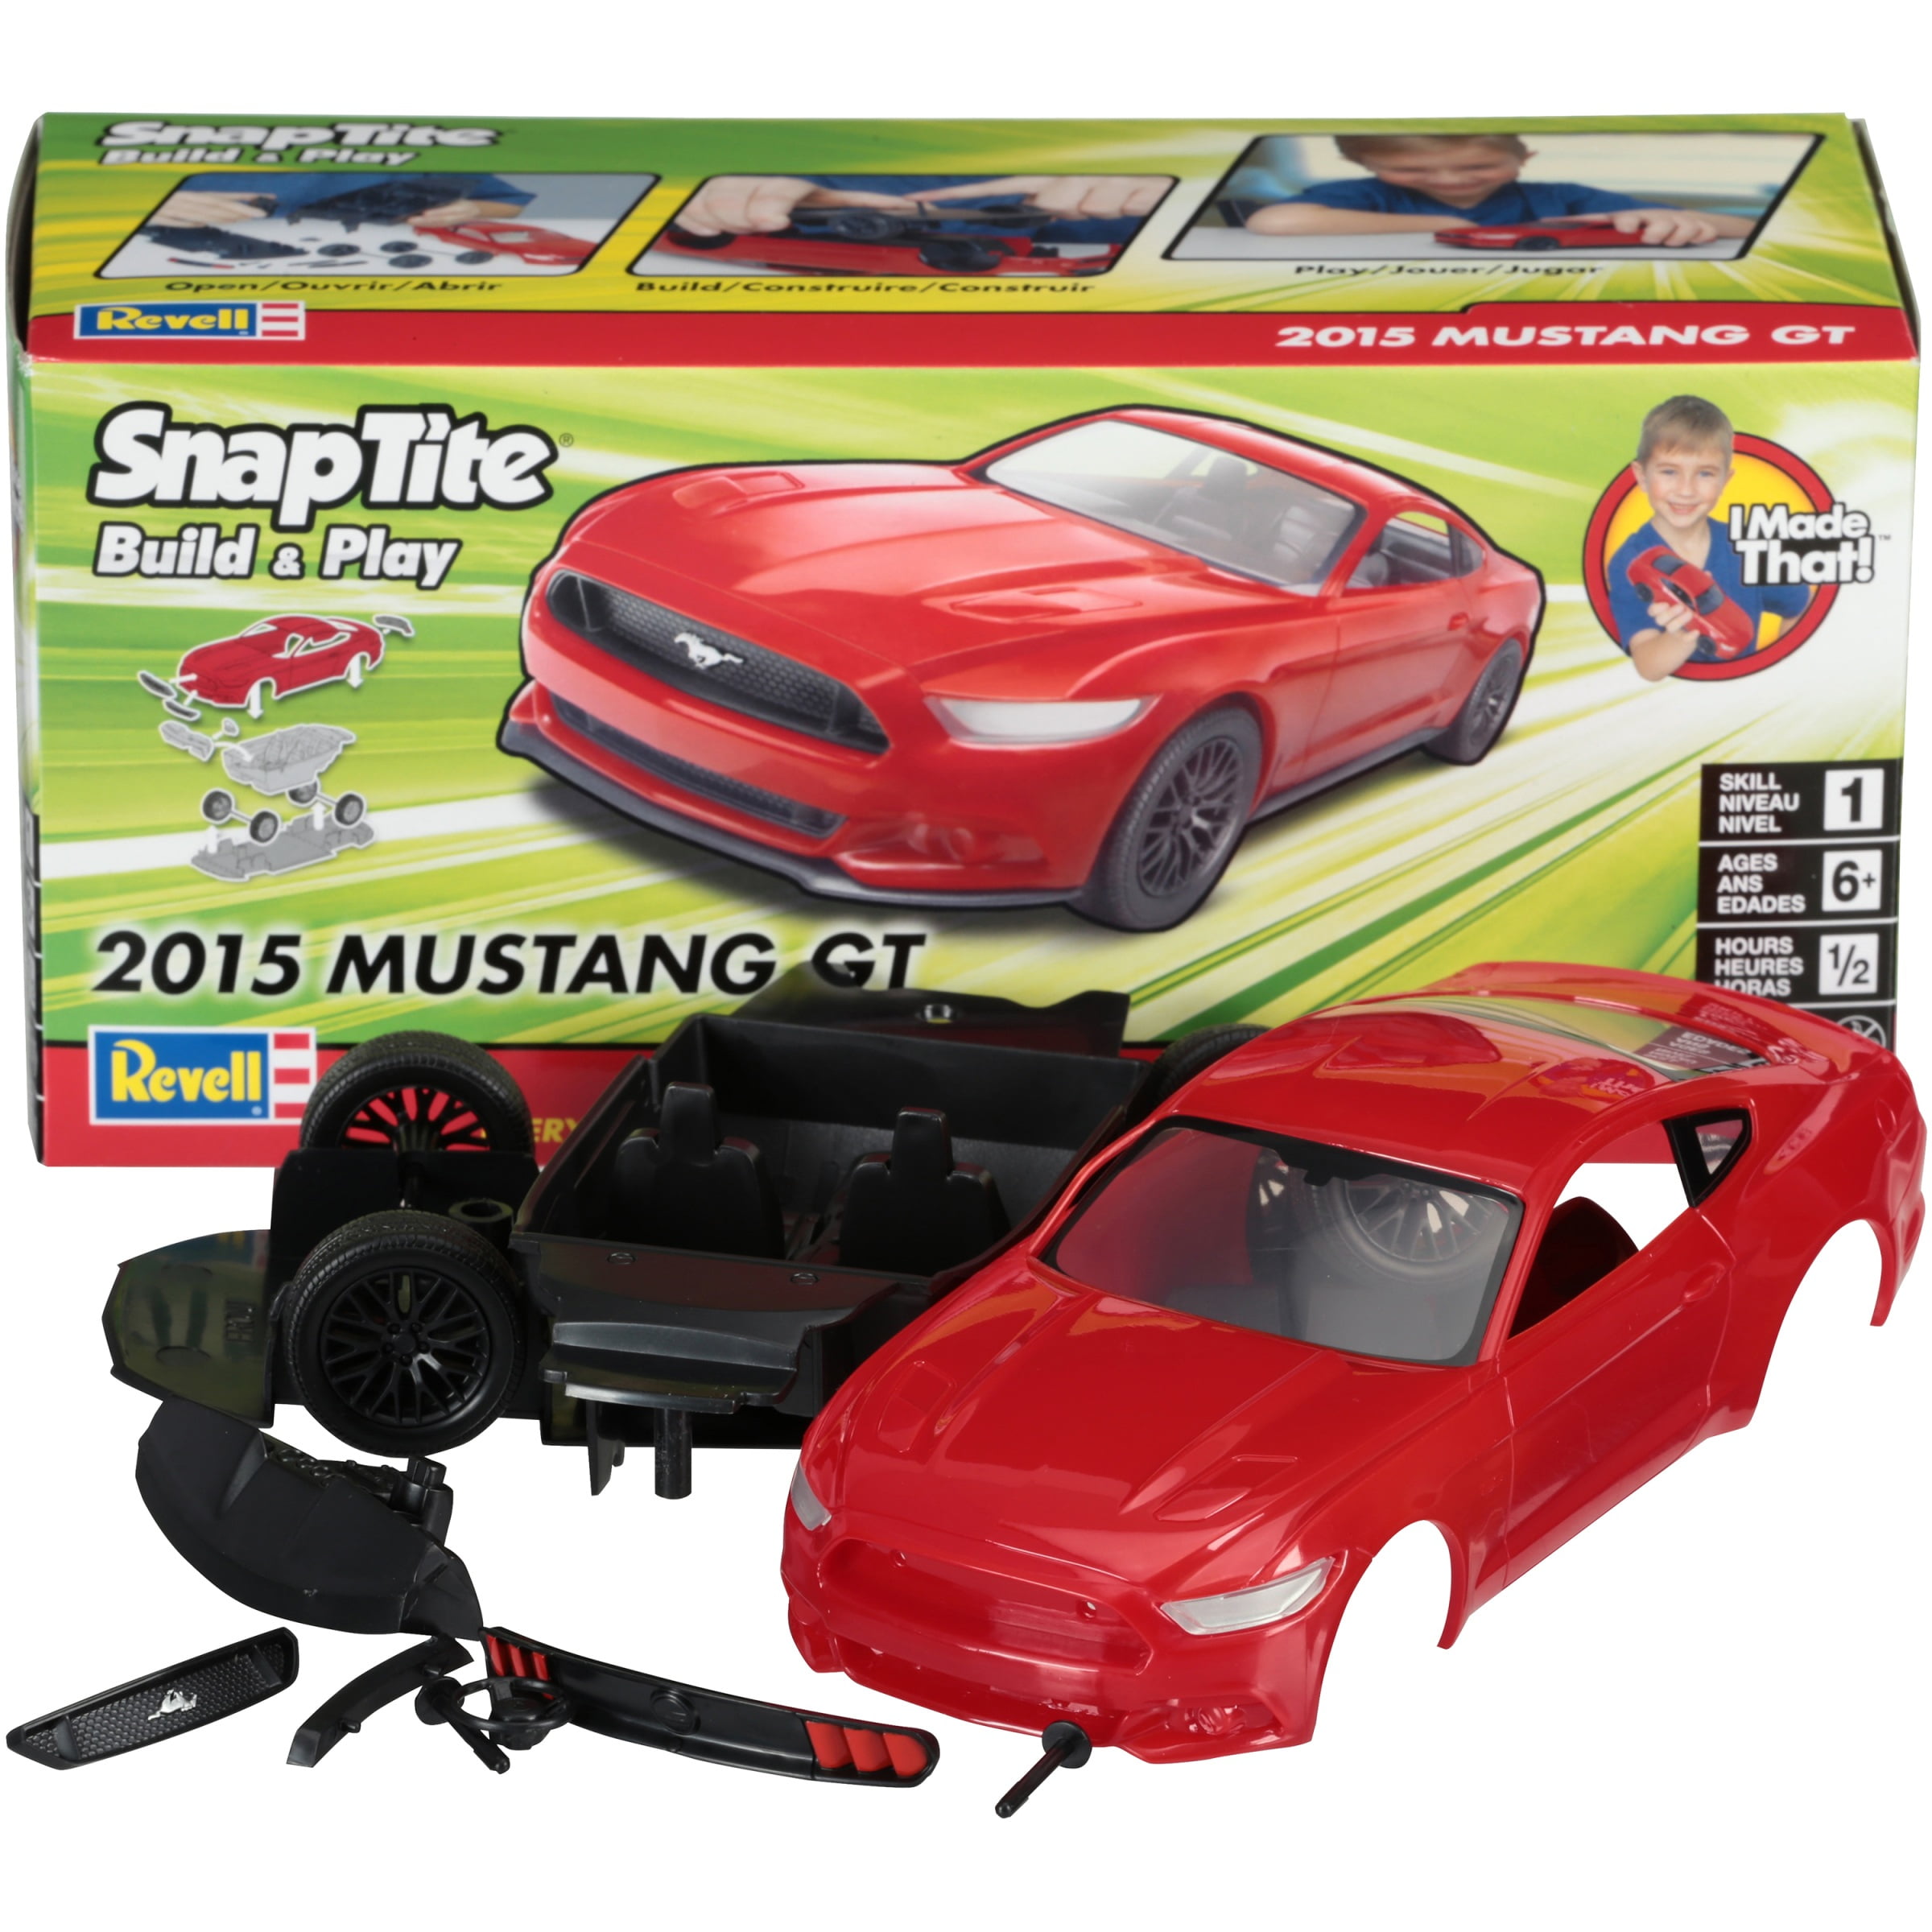 & Kit Revell® SnapTite® Mustang GT Box 2015 12 Play pc Build